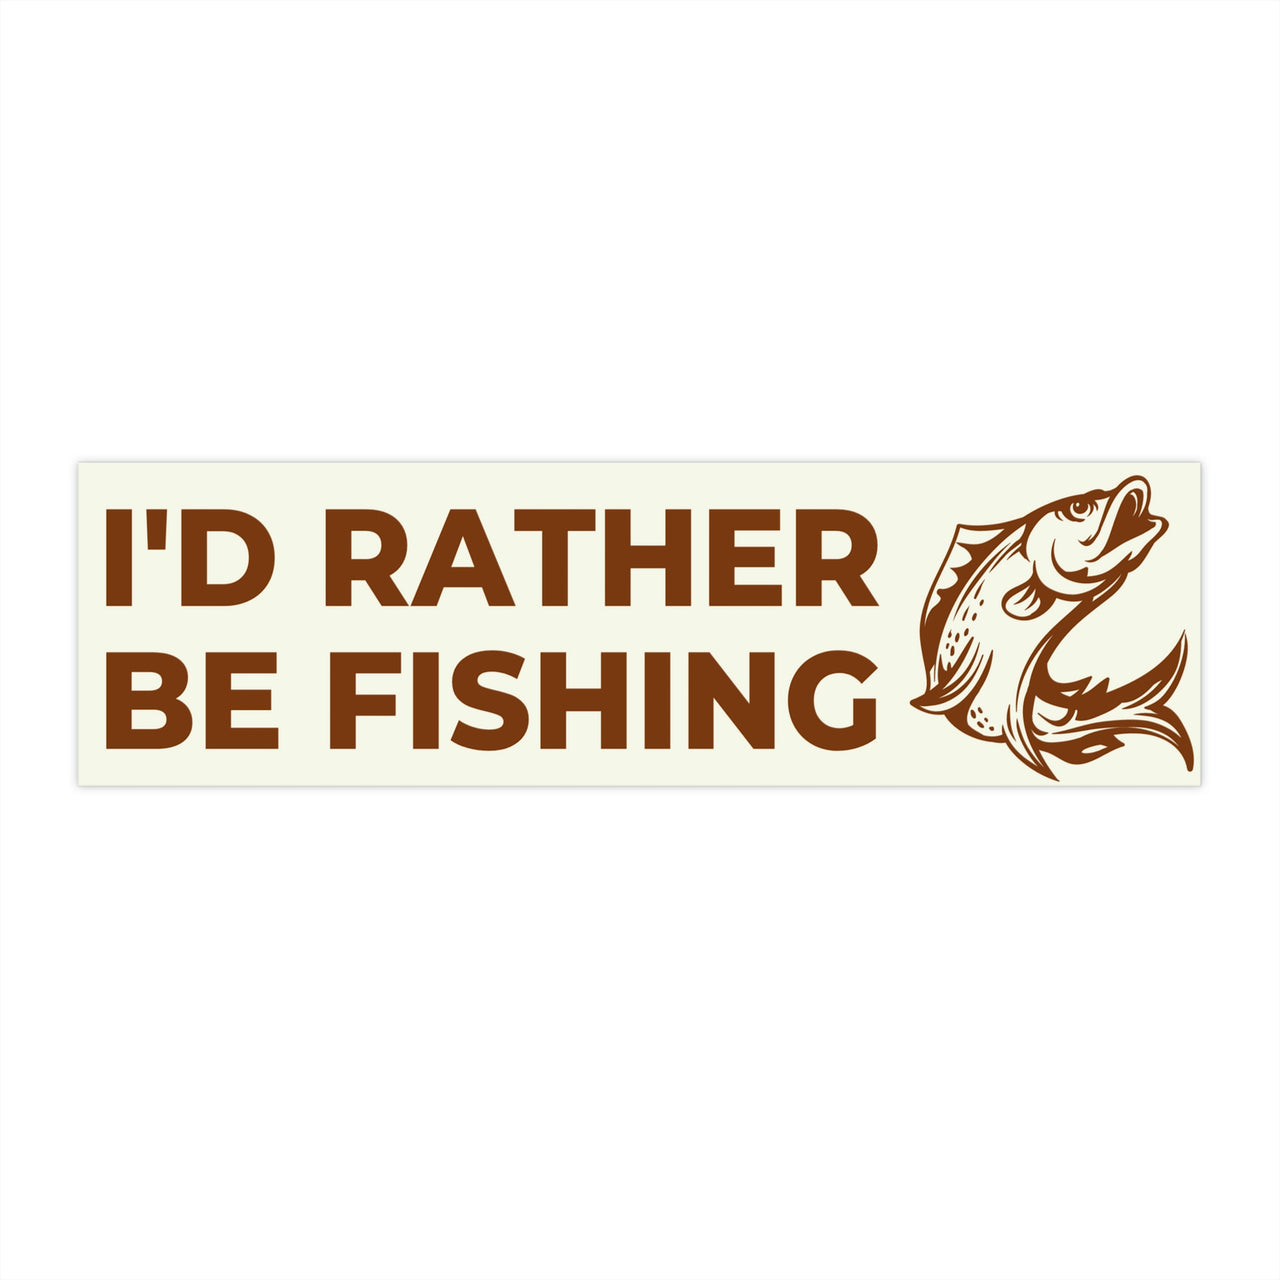 I'd Rather Be Fishing Bumper Stickers